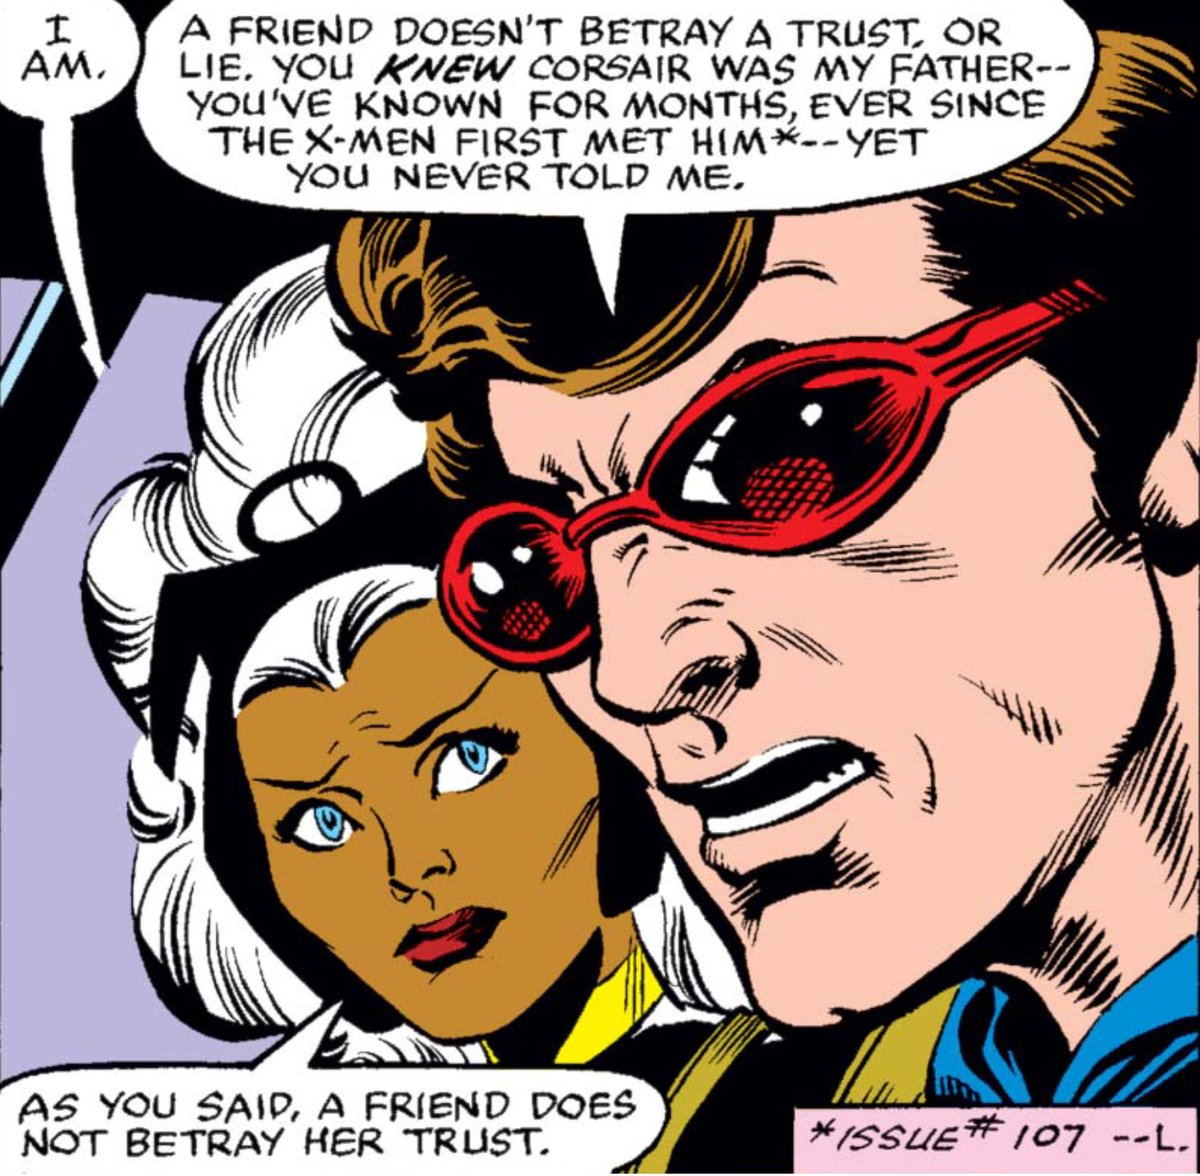 With the Sidri off their tail, Scott has time to confront his anger with Ororo. Even more than it does with Corsair, her "betrayal" cuts deep. His expectations mean Ororo's let him down, even if those expectations are unfair. Relationships remain among Scott's weaknesses.